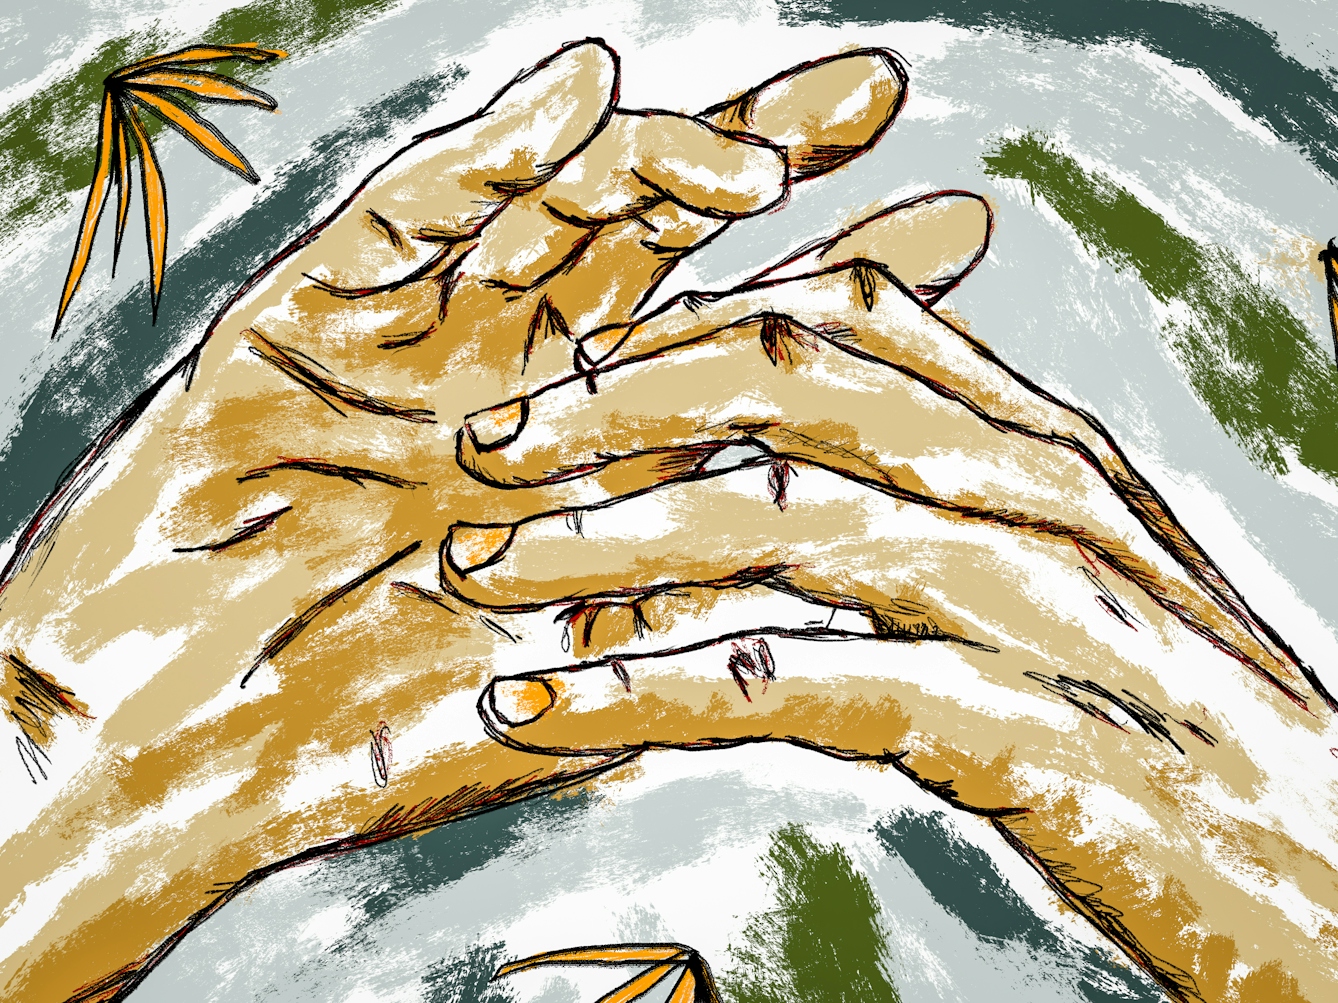 Detail from a larger colour digital artwork showing a figurative study of a pair of hands gracefully suspended in mid air, visible from just above the wrists. The hand on the left is held palm towards the viewer, fingers slightly extended. The hand on the right is palm facing down, fingers extended slightly towards the palm of the other hand, fingertips just making gentle contact. The background is made up of light textured rough lines of green, light blue greys and whites, punctuated by yellow leaf-like plants.